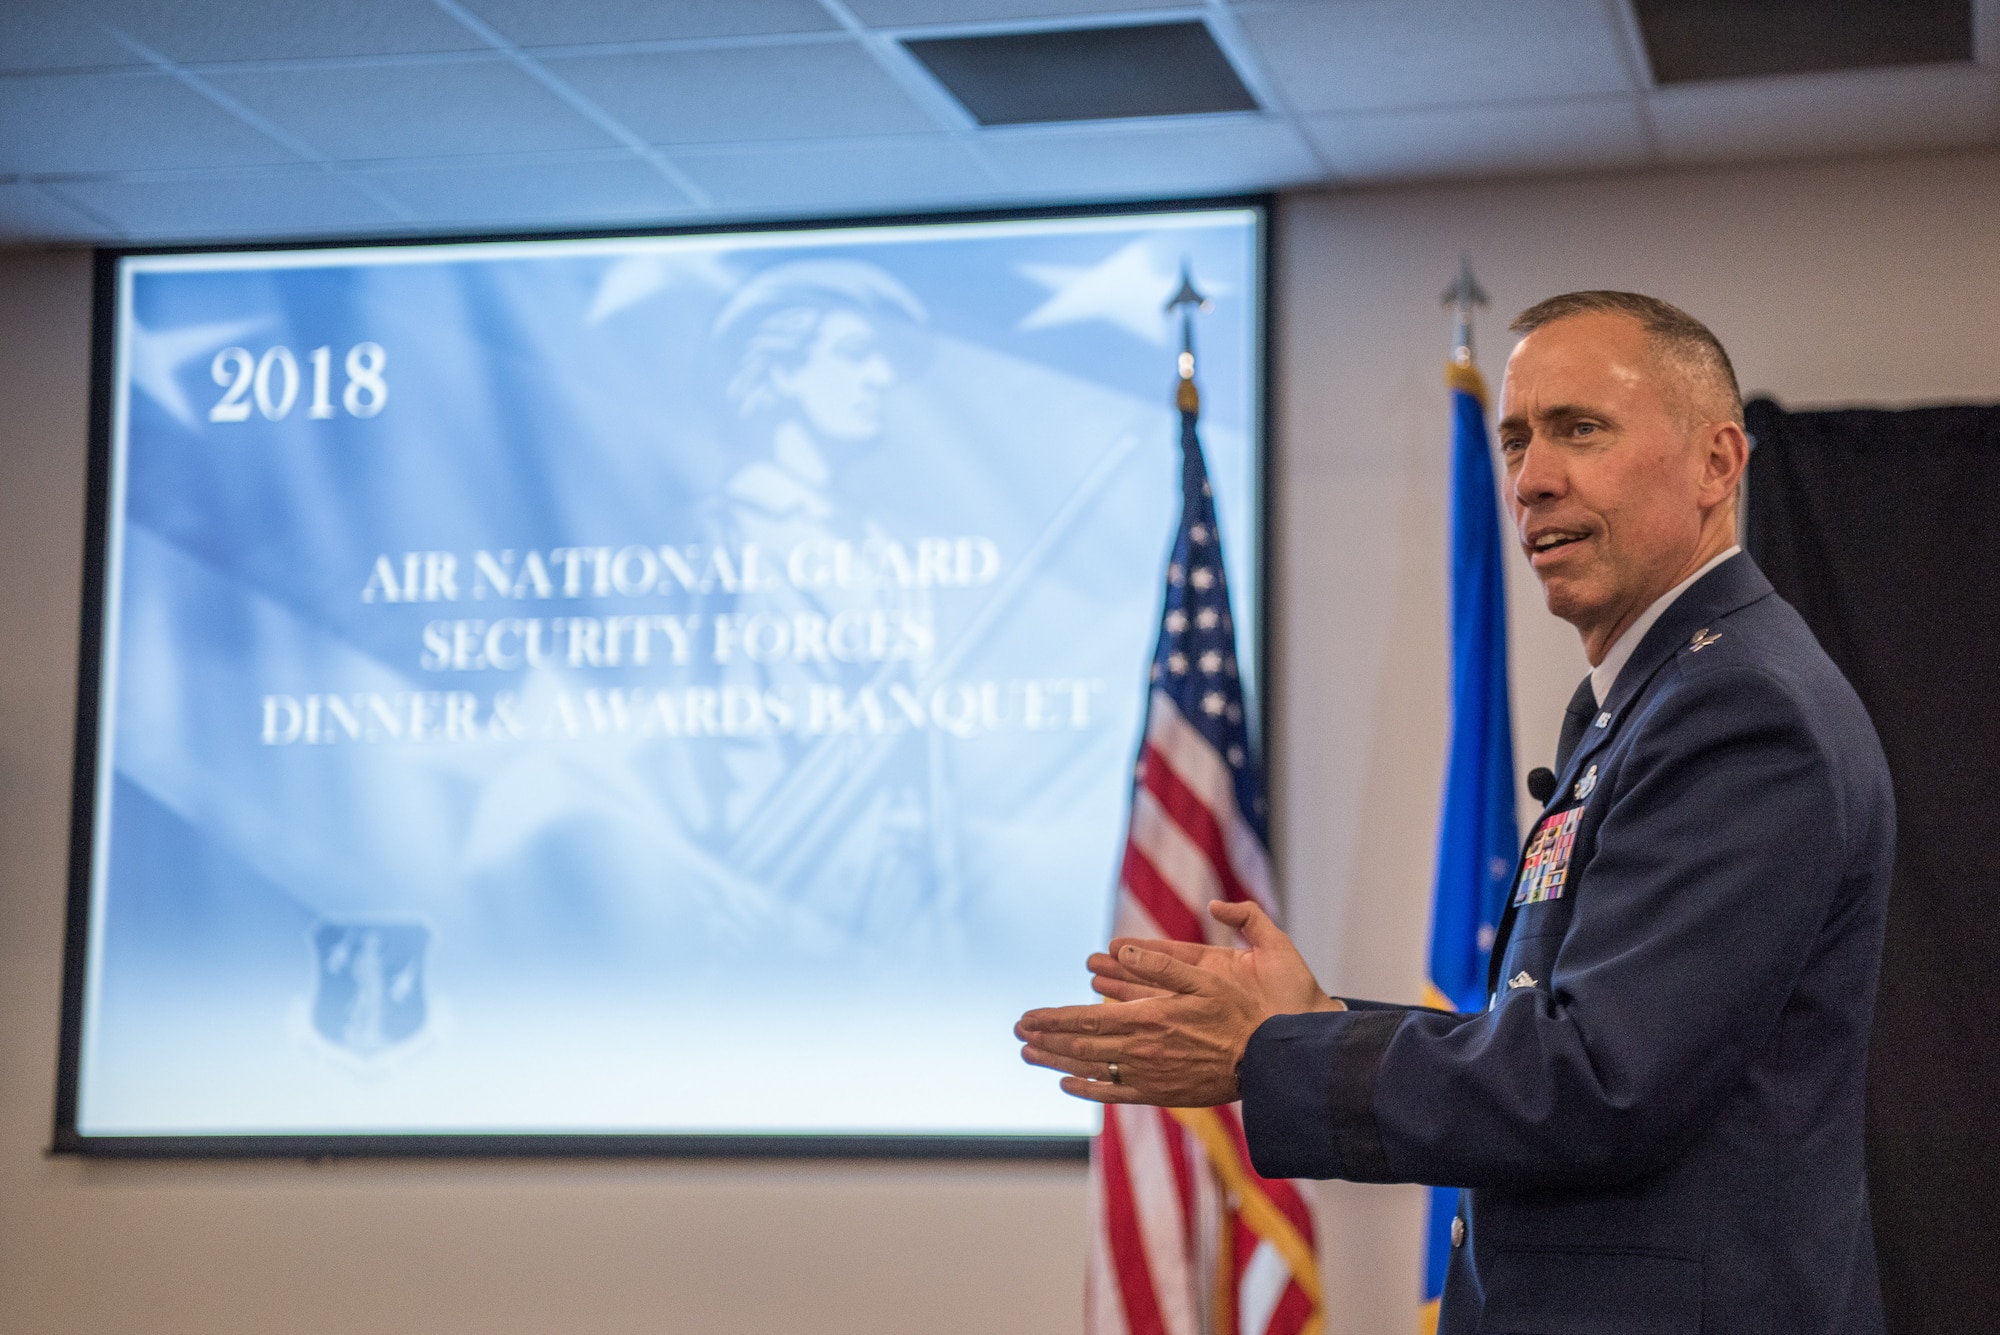 Brig. Gen. John Wilcox II, Director of Operations and Communications, Headquarters Air Force Global Strike Command, Barksdale Air Force Base, Louisiana, speaks to Air National Guard security forces Airmen during the 2018 Air National Guard Security Forces Squadron Dinner and Awards Banquet at the National Center for Employee Development Conference Center in Norman, Oklahoma, Sept. 12, 2018. Every year, leadership from all of the Air National Guard security forces squadrons meet in one place to discuss past, current and upcoming topics that impact the career field, as well as recognize outstanding security forces Airmen. (U.S. Air National Guard Photo by Staff Sgt. Kasey M. Phipps)